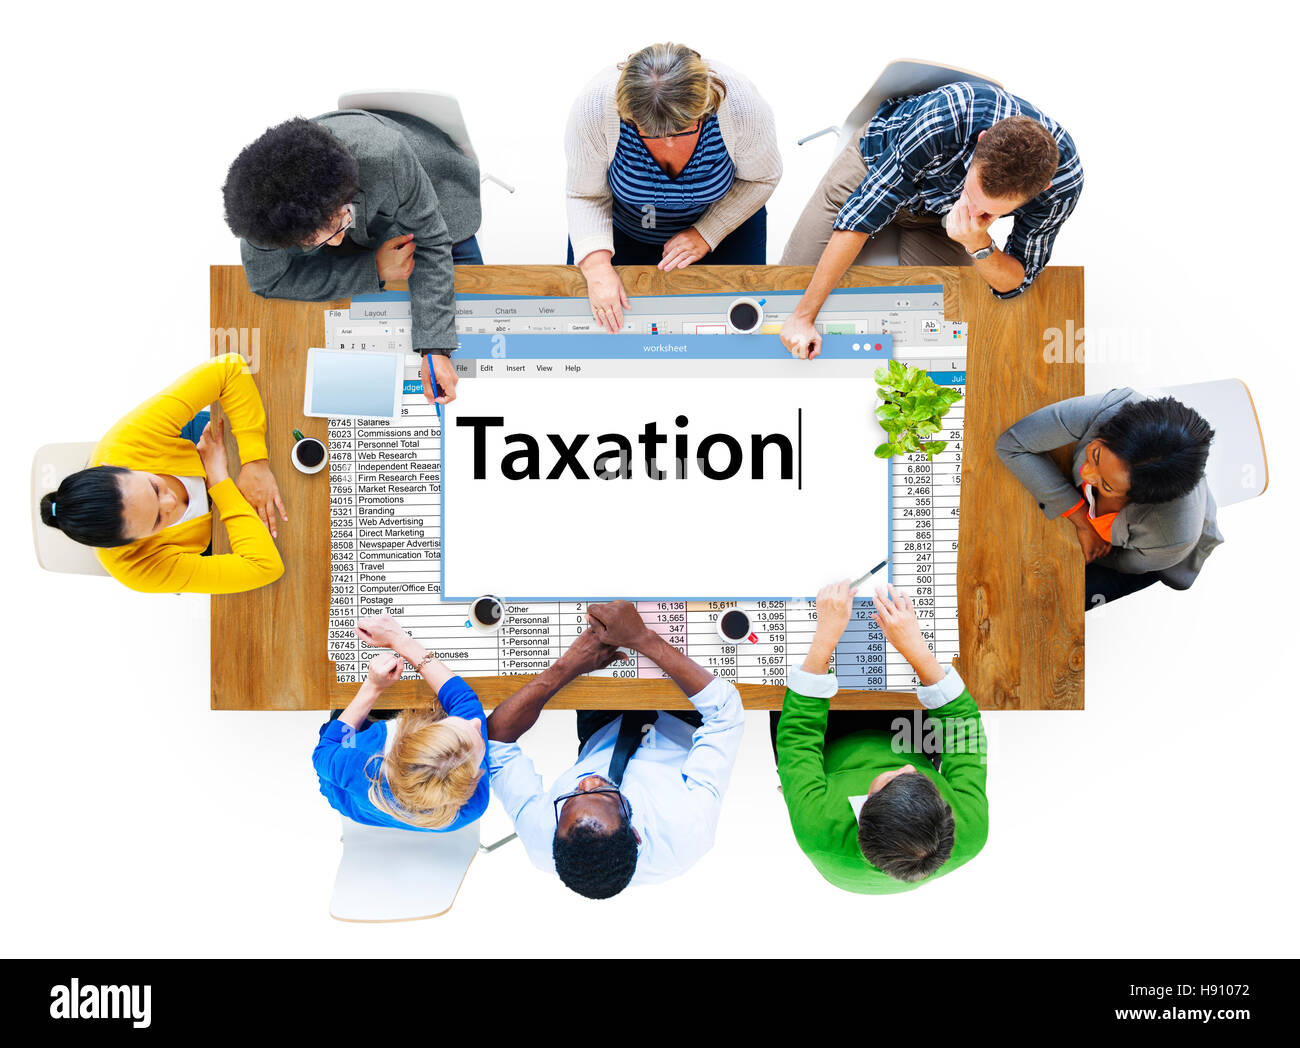 Taxation Payment Finance Economy Accounting Concept Stock Photo